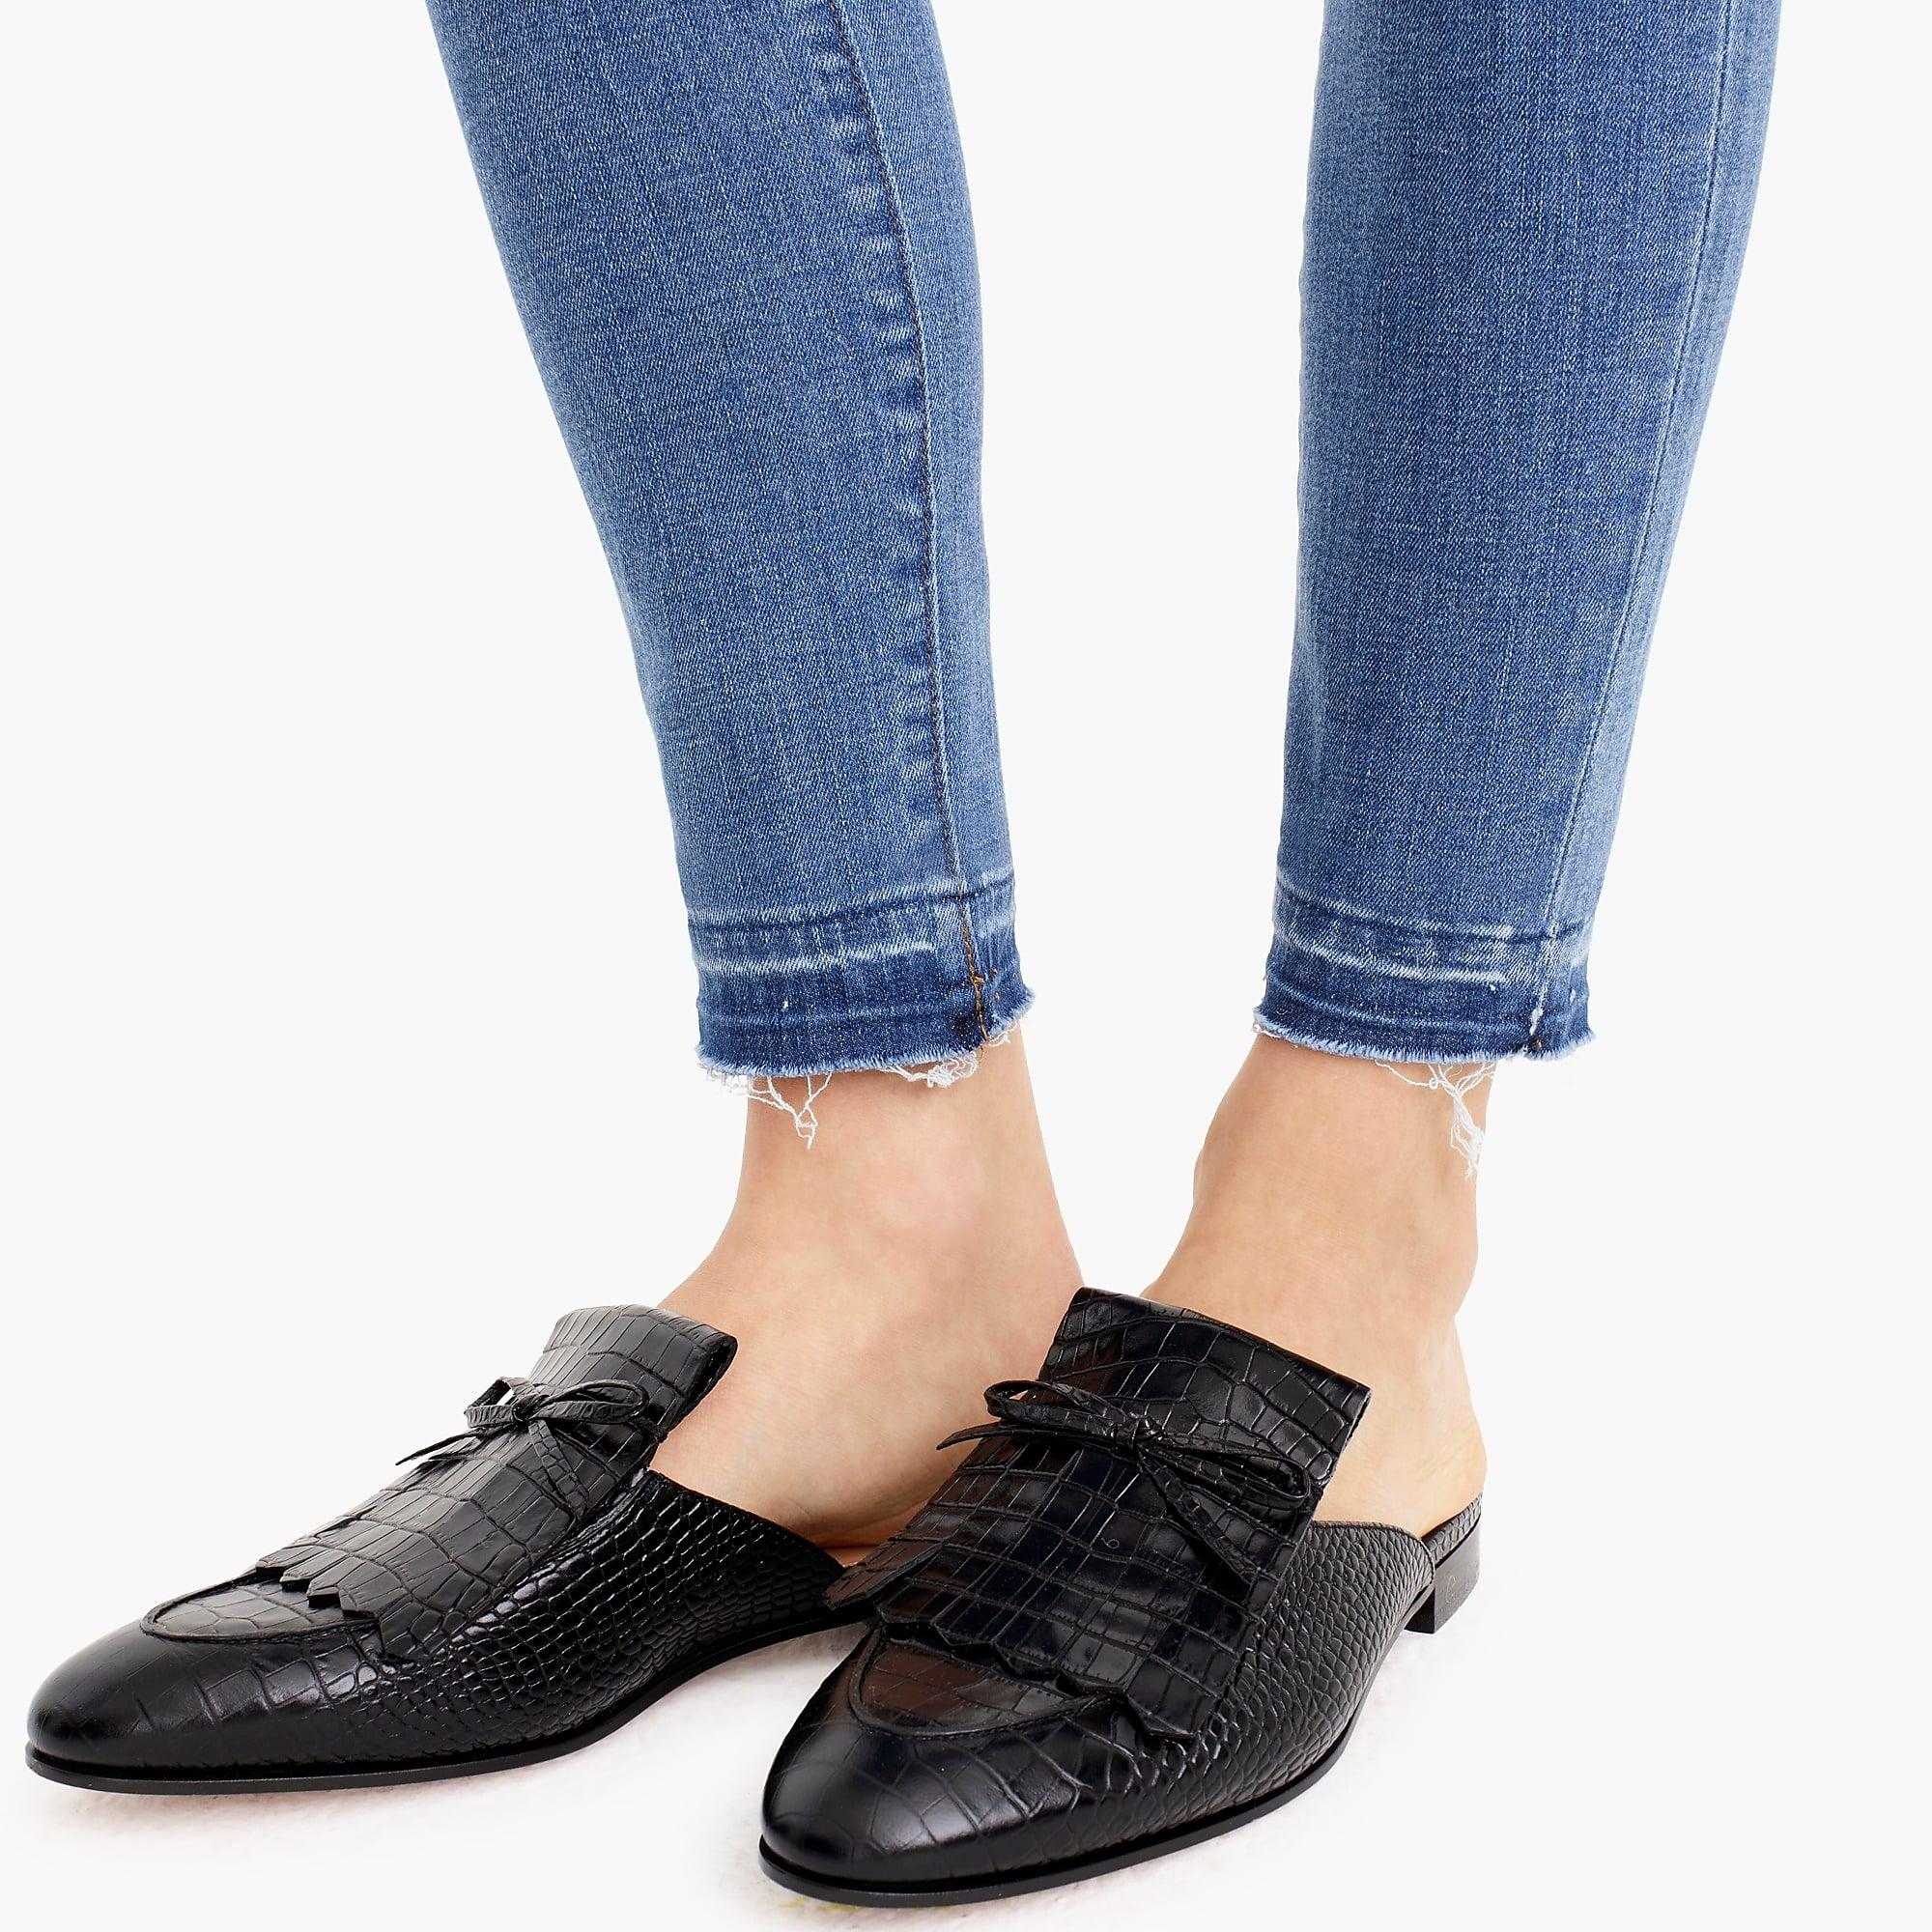 Kiltie Academy Penny Loafer Mules 